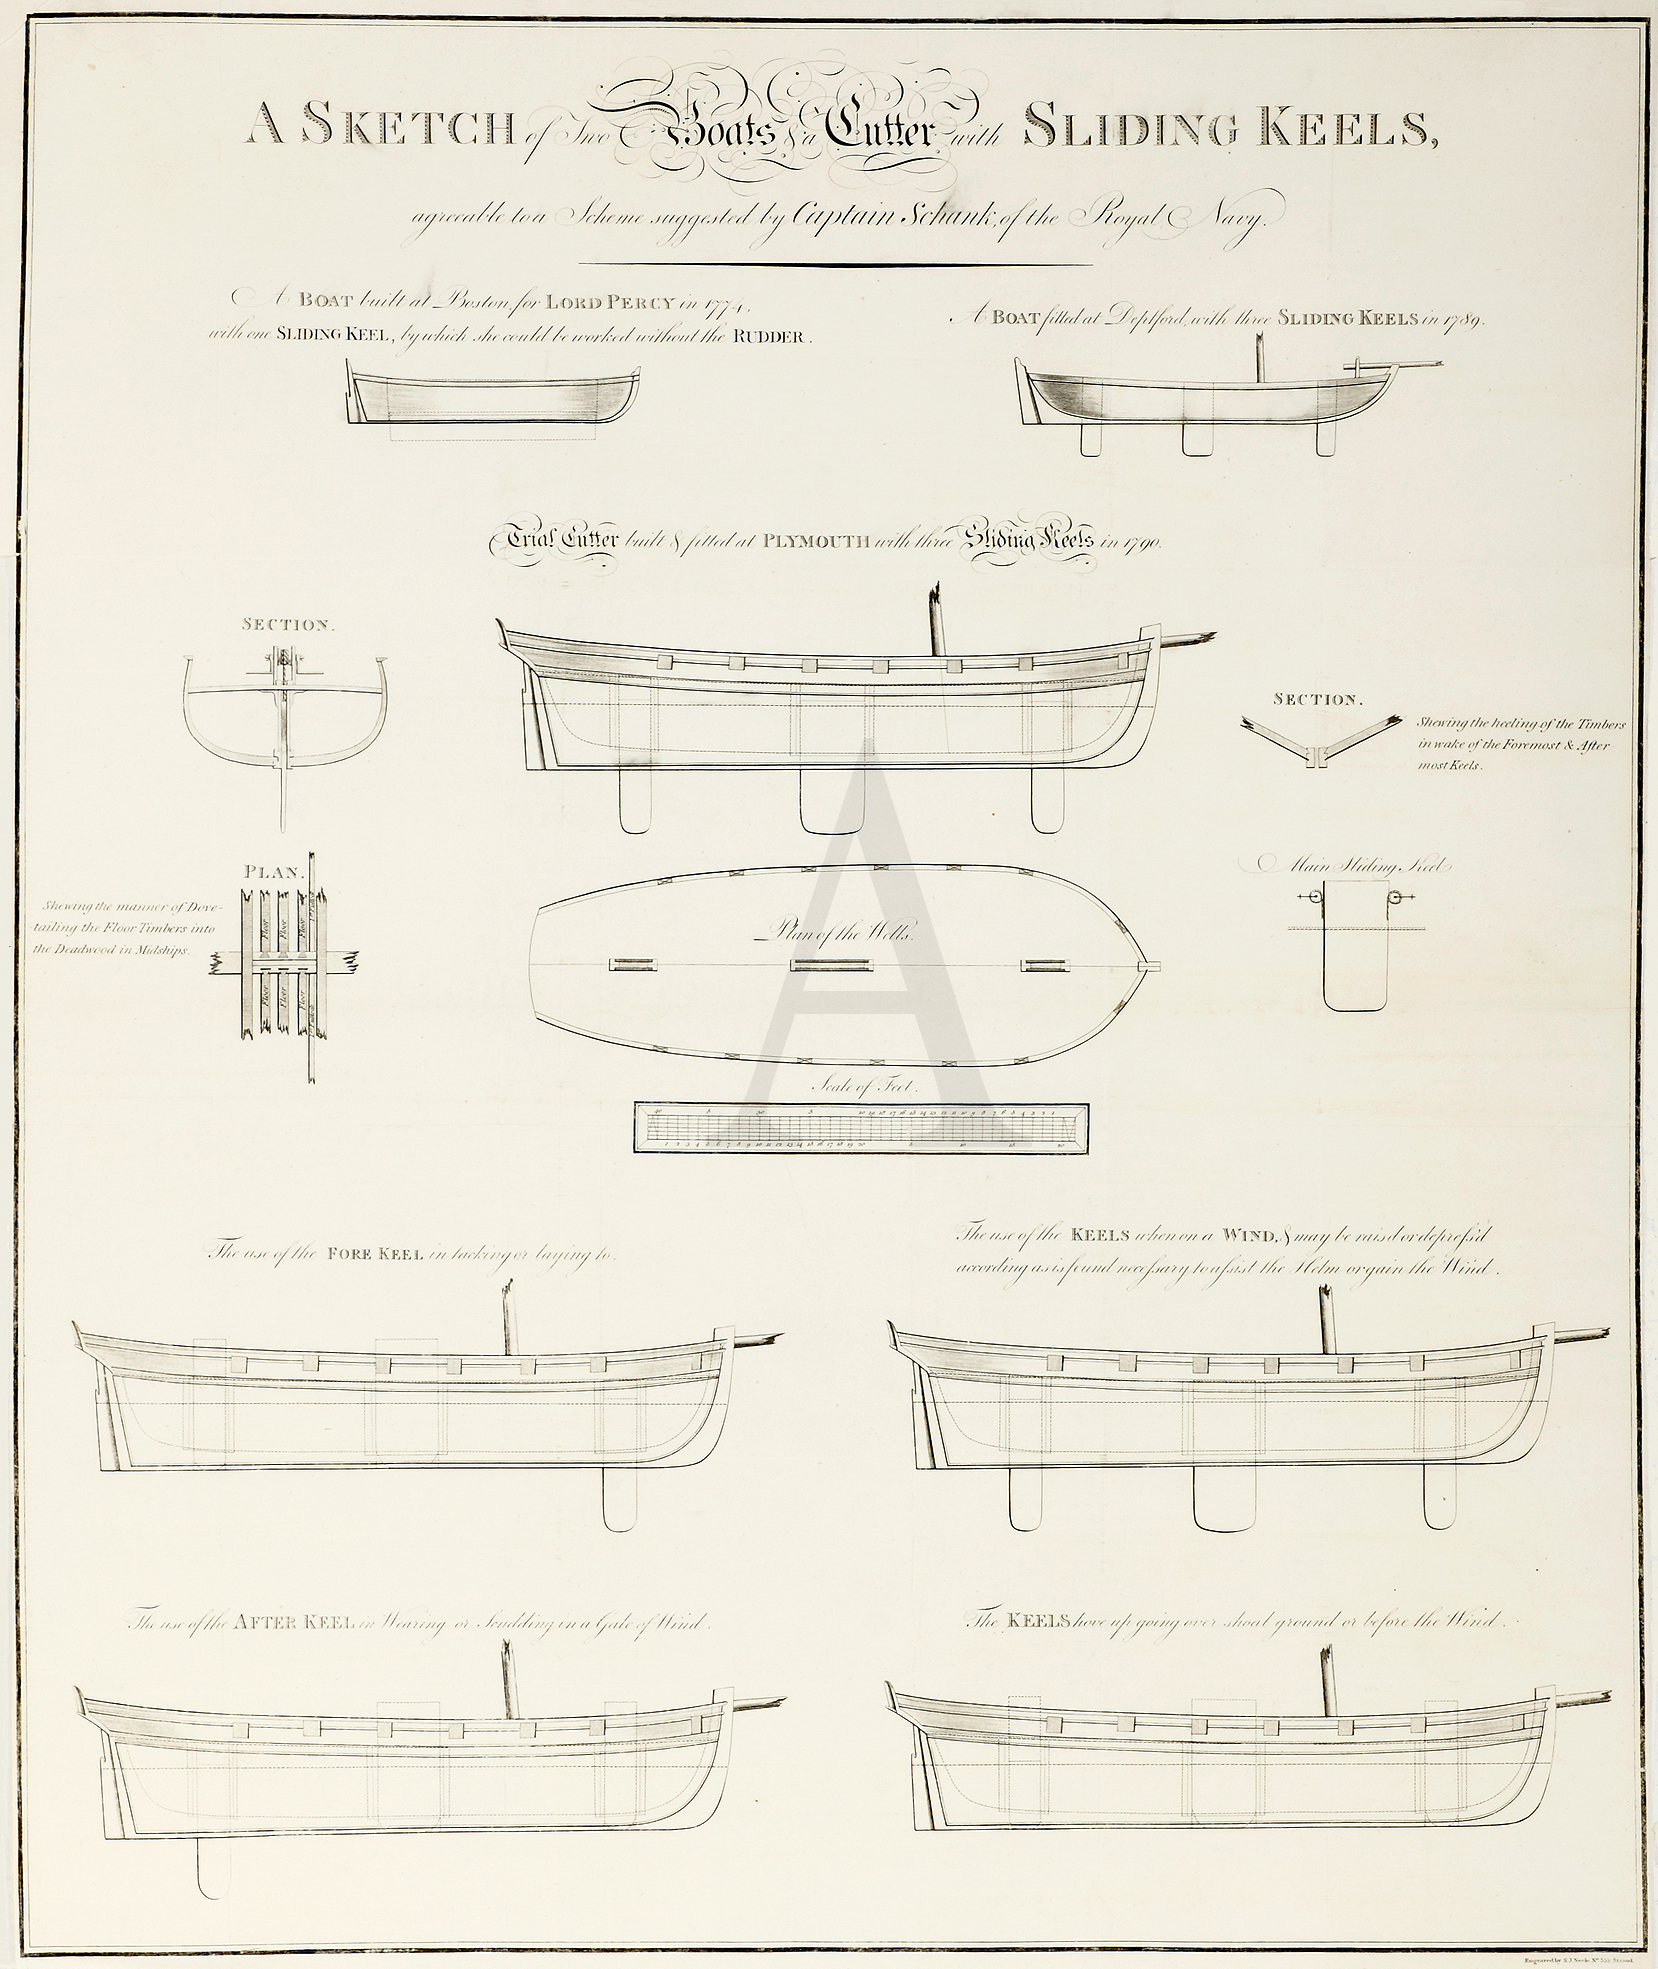 2. A Sketch of the Boats & a Cutter with Sliding Keels, Agreeable to a Scheme Suggested by Captain Schank, of the Royal Navy. - Antique Print from 1804